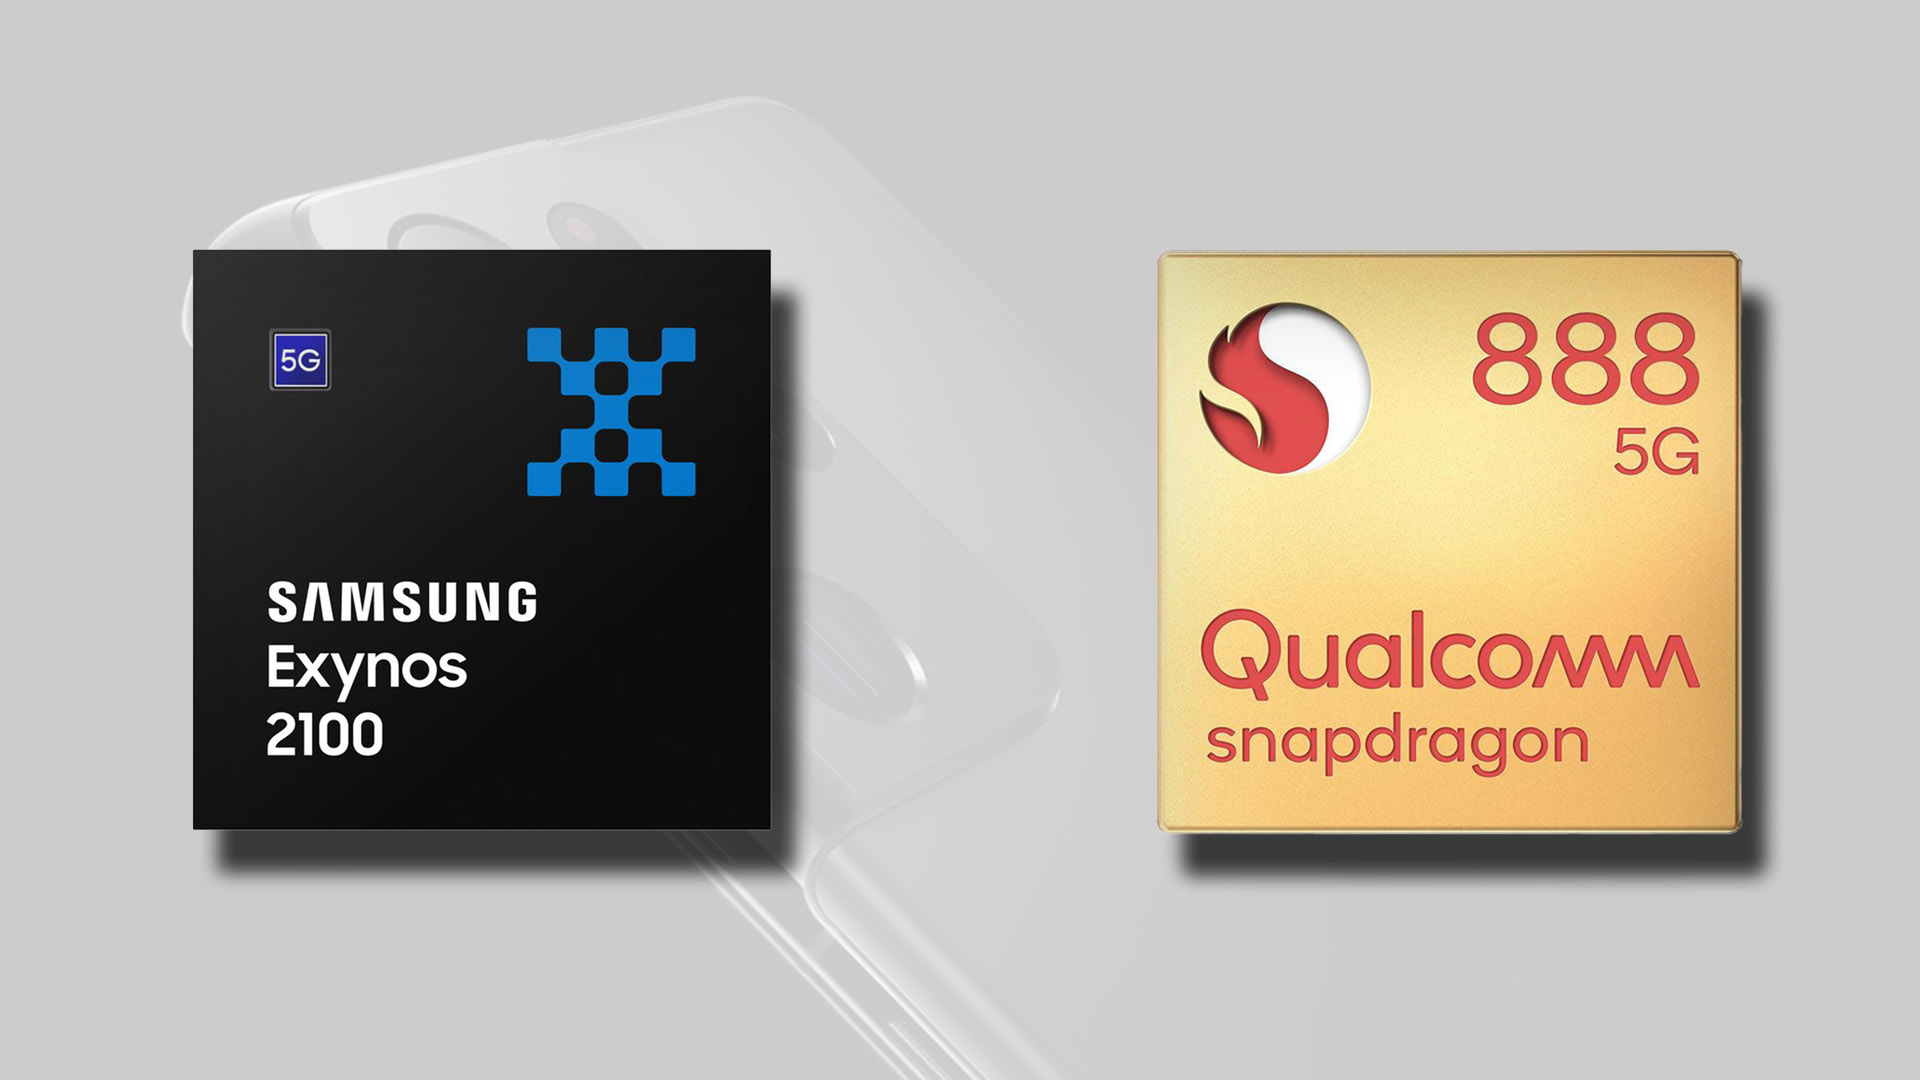 Exynos 2100 vs Snapdragon 888: Which Is the Better Processor For Samsung Smartphones?